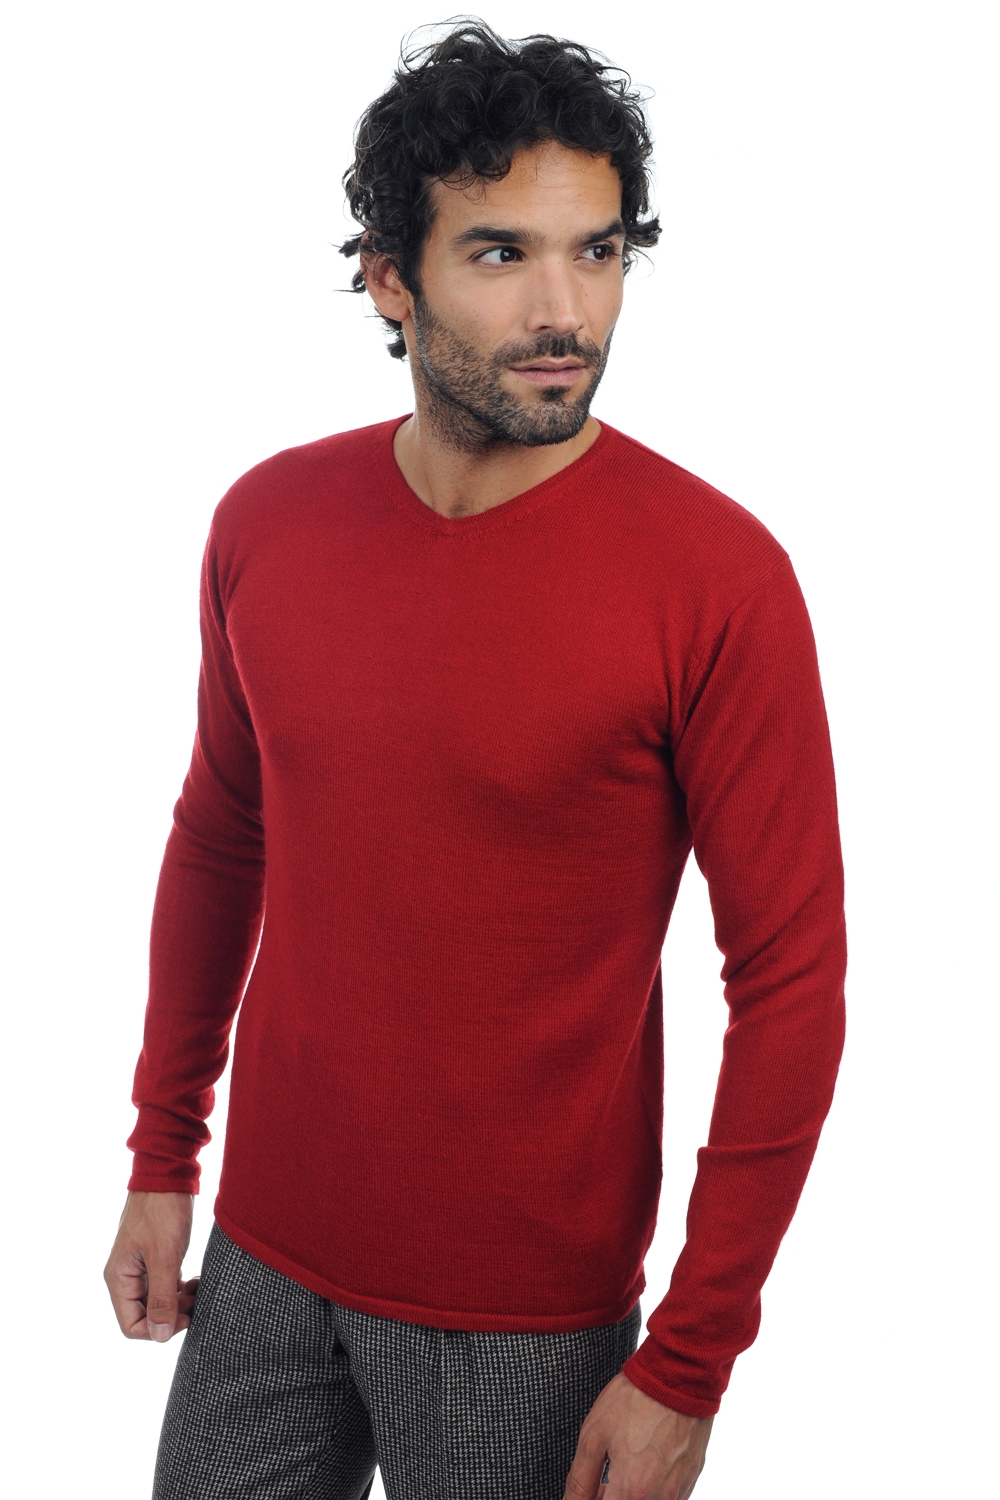 Baby Alpaga pull homme col v ethan rouge m